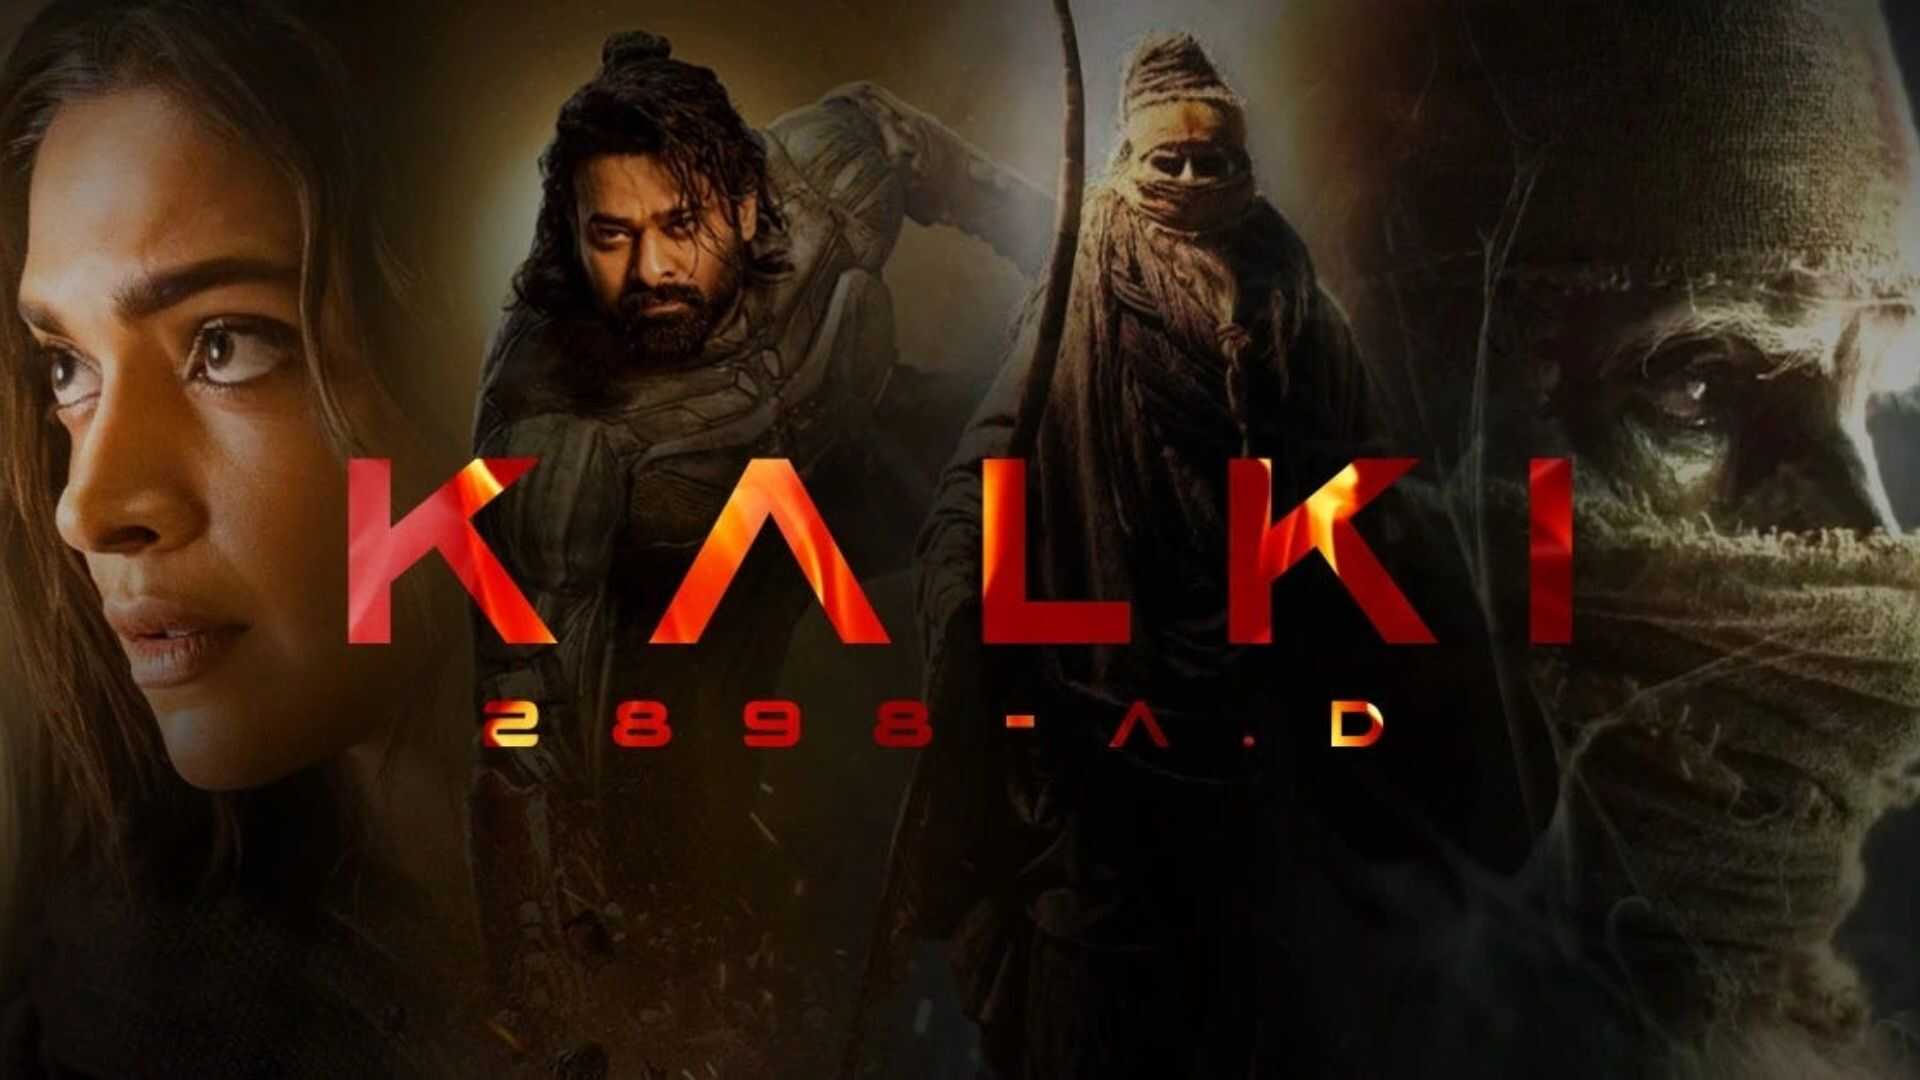 'Kalki 2898 AD' Trailer 2: Decoding The Characters And Clues